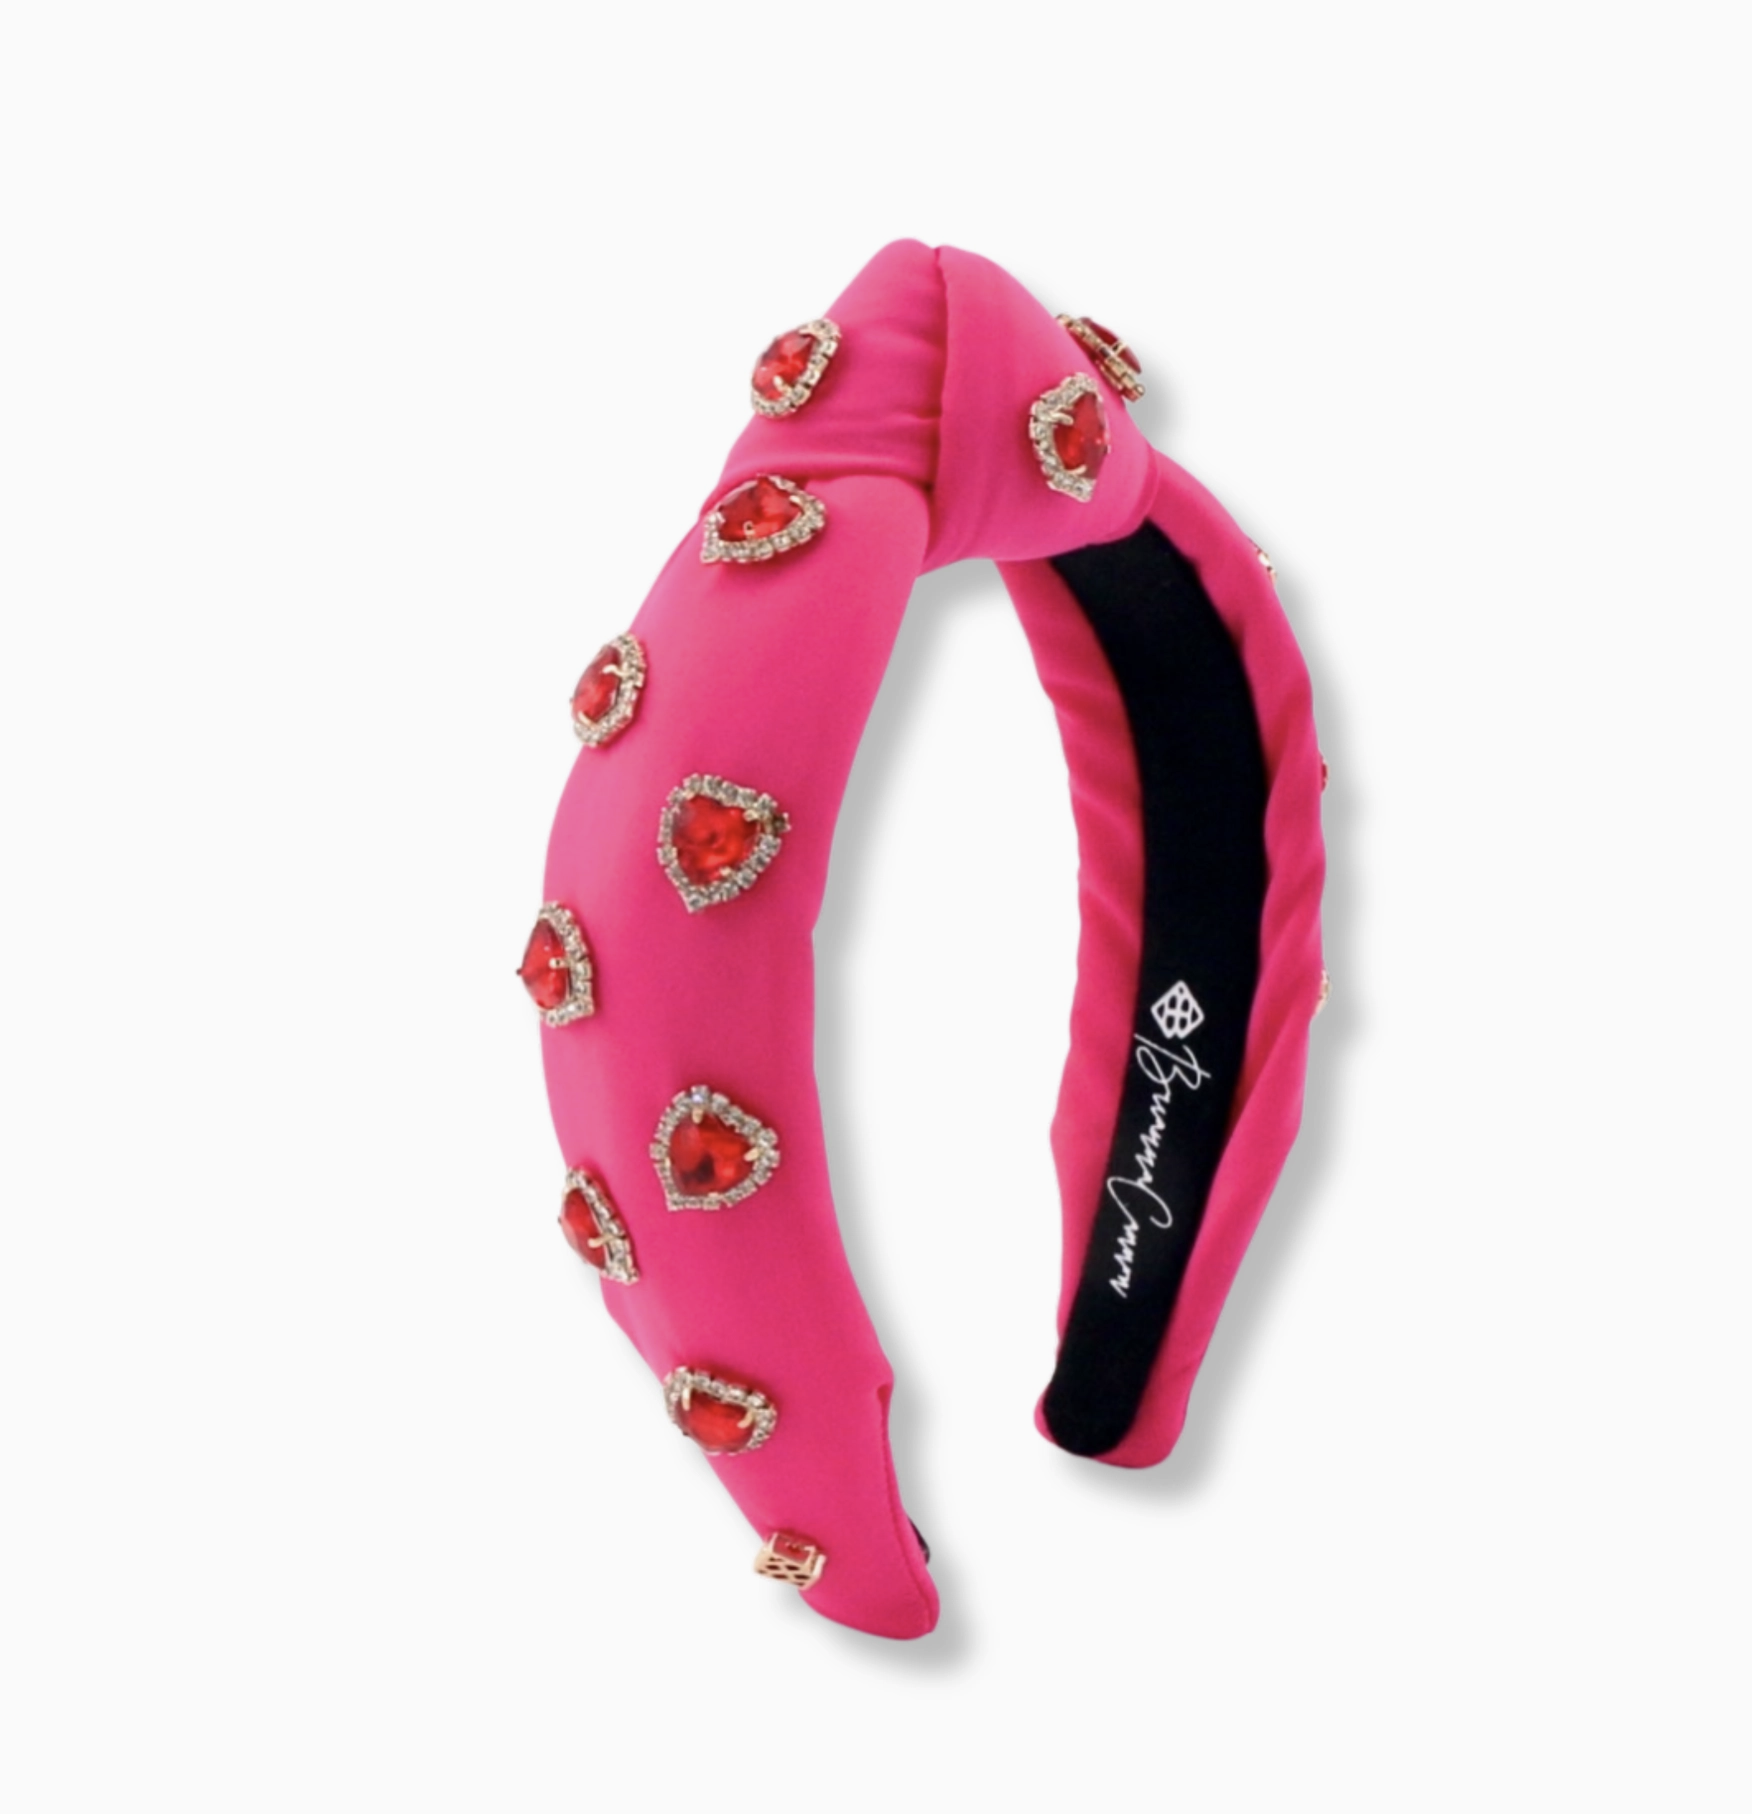 Brianna Cannon Child Size Hot Pink Headband with Red Pavé Crystal Hearts